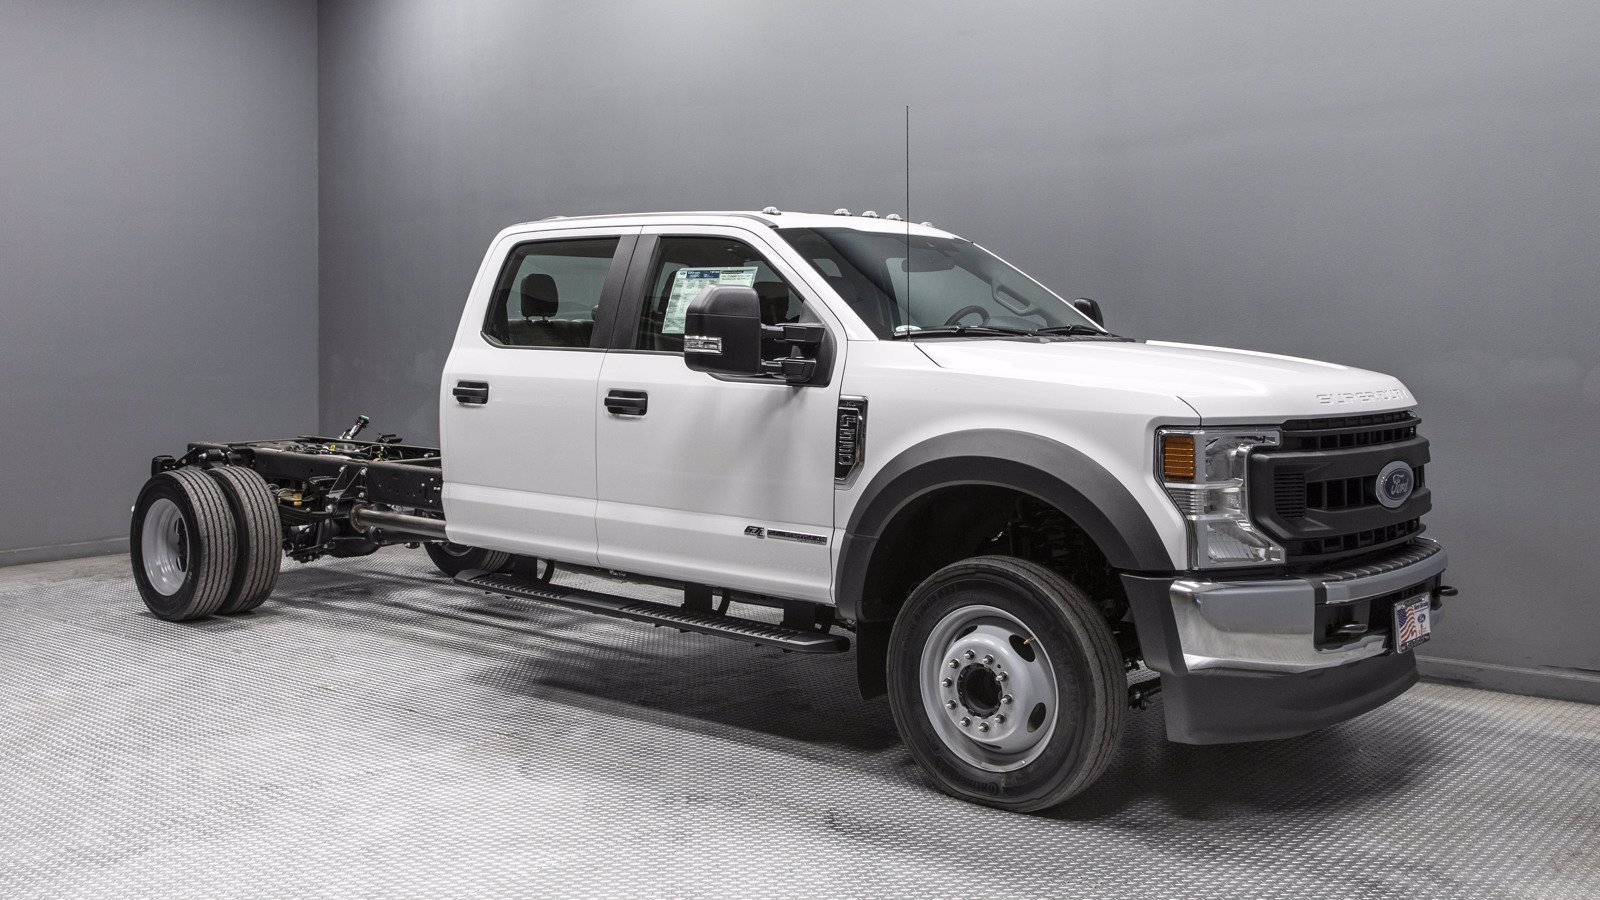 New 2020 Ford Super Duty F550 DRW XL Crew Cab ChassisCab in Redlands